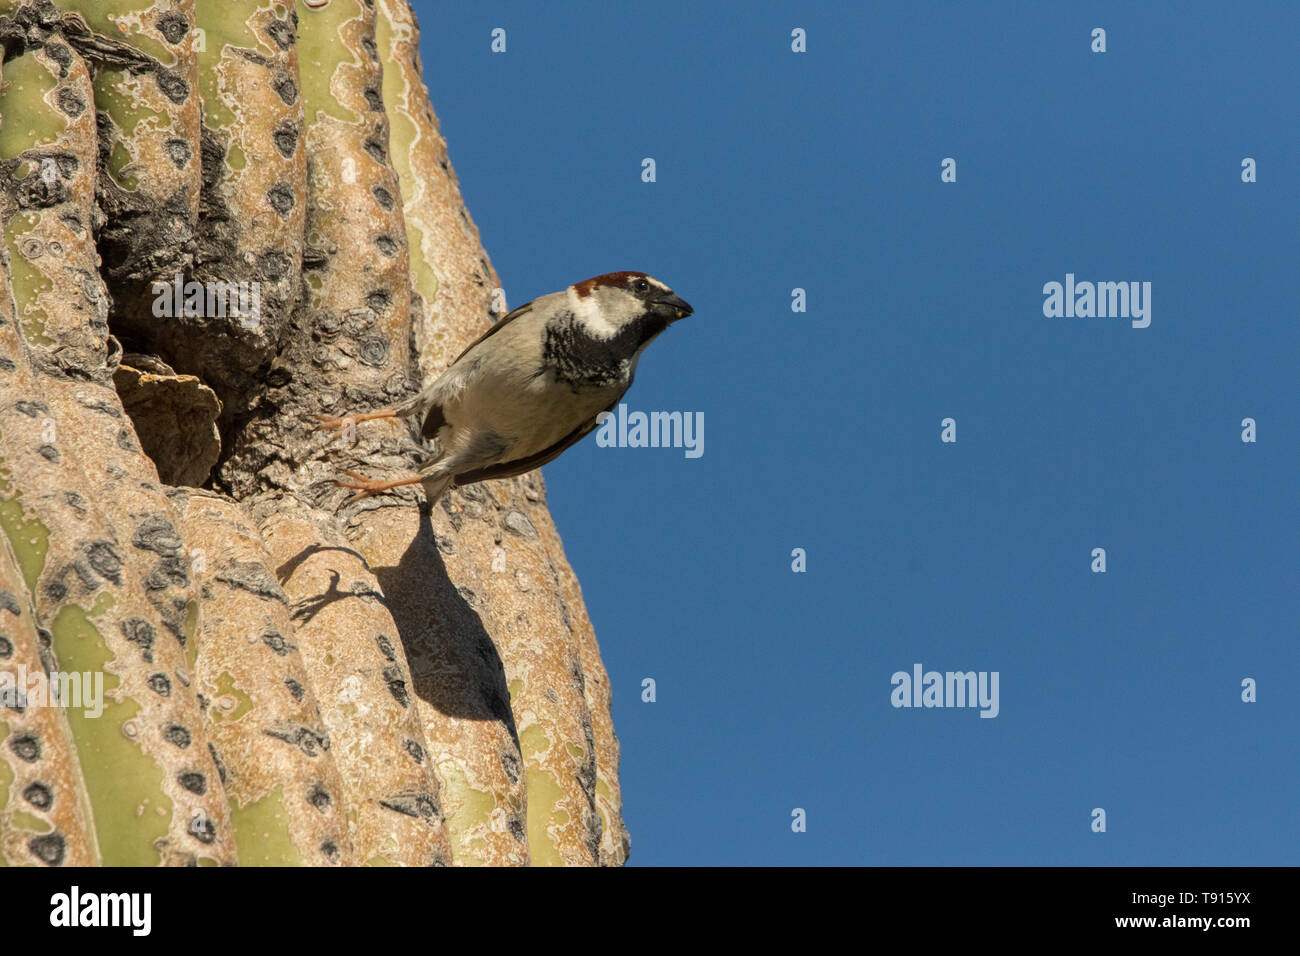 house sparrow (Passer domesticus), male, flying from nest in saguaro cactus, Sonoran desert Arizona, a species introduced to North America from Eurasi Stock Photo